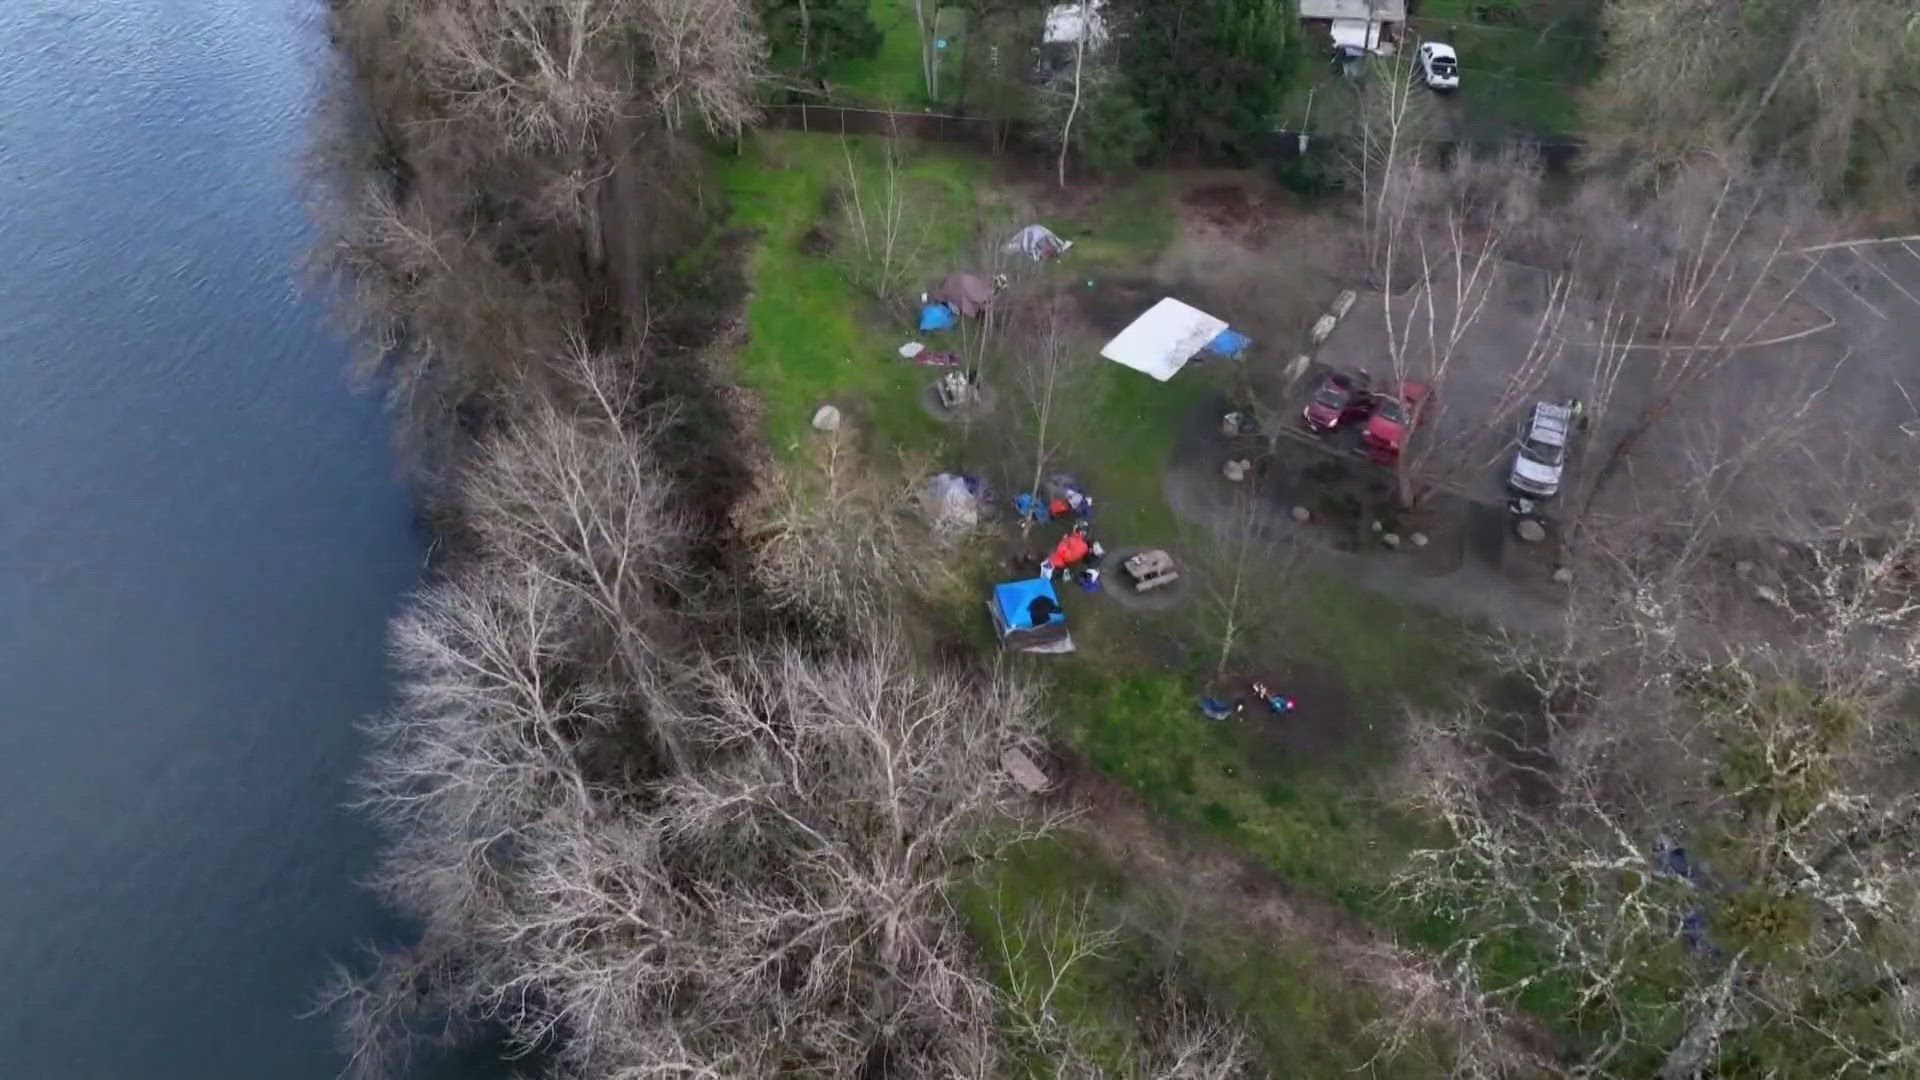 The city of Grants Pass, Ore. had its ban on camping upheld in a 6-3 decision on Friday.